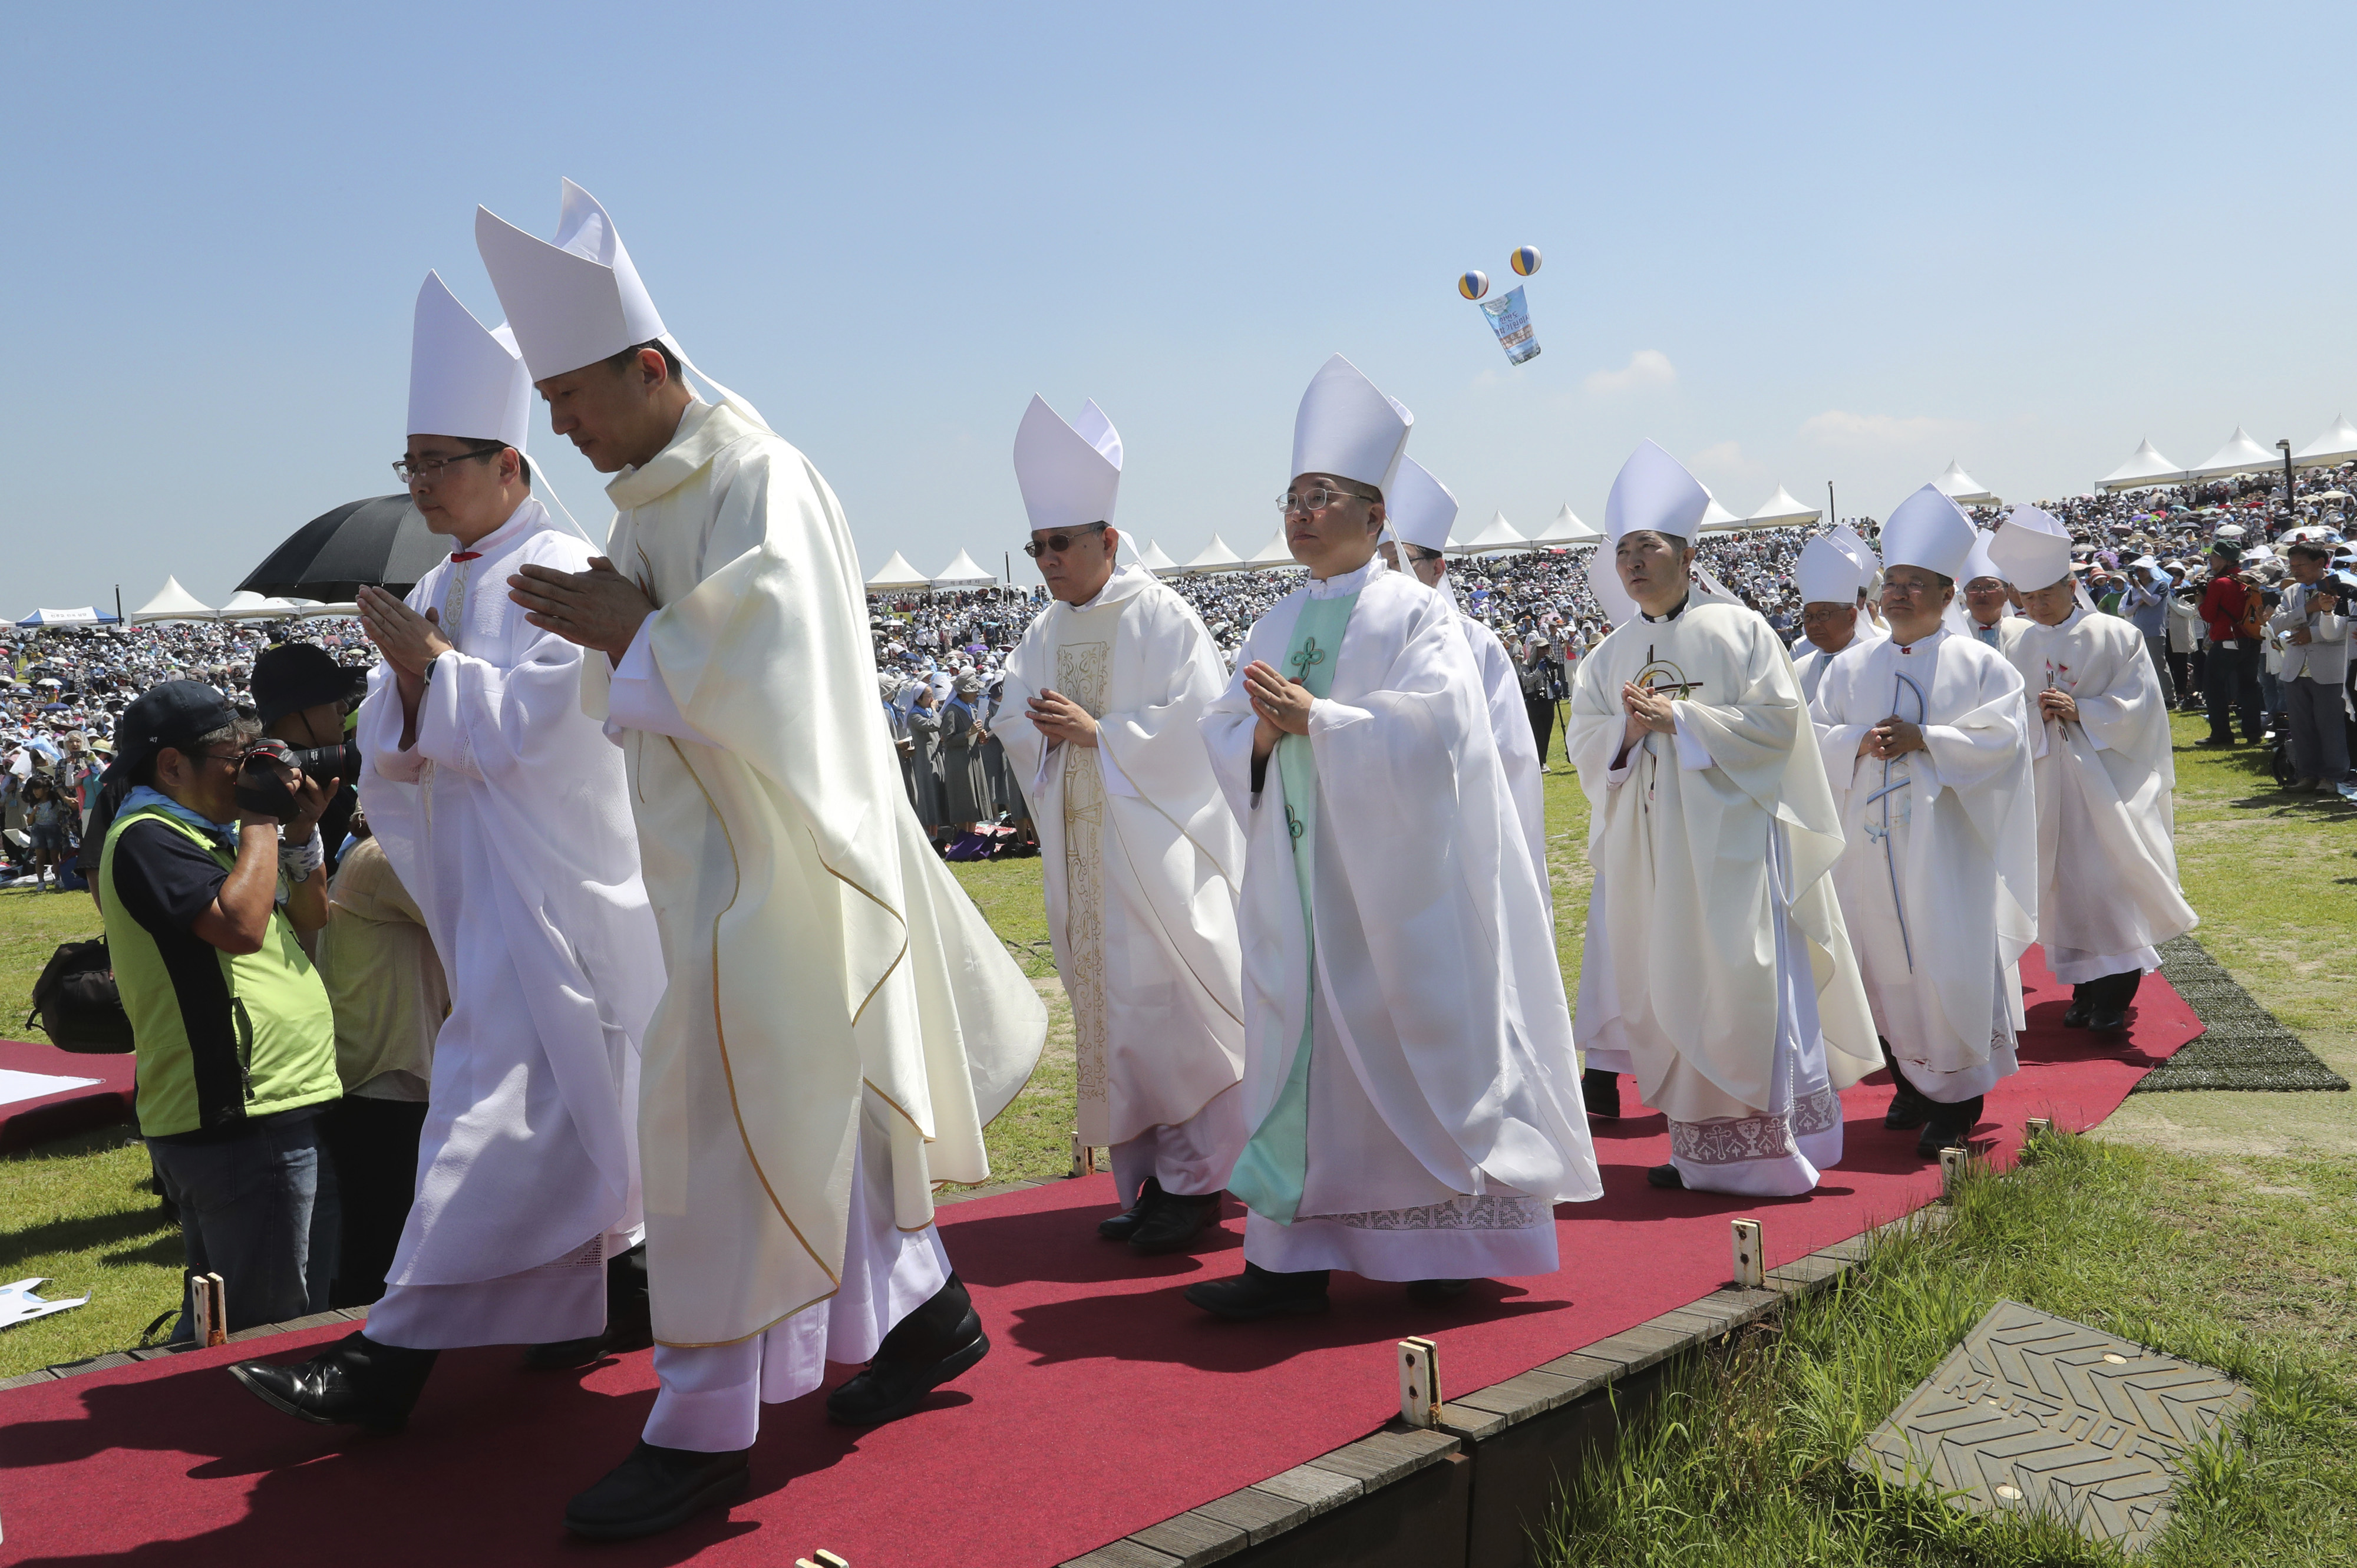 South Korean Catholic devotees arrive to attend a service to mark the 69th anniversary of the outbreak of the Korean War at the Imjingak Pavilion, near the demilitarized zone of Panmunjom, in Paju, South Korea, Tuesday, June 25, 2019. South Korea and North Korea fought a devastating three-year war in the early 1950s that ended with an armistice, not a peace treaty. (AP Photo/Ahn Young-joon)